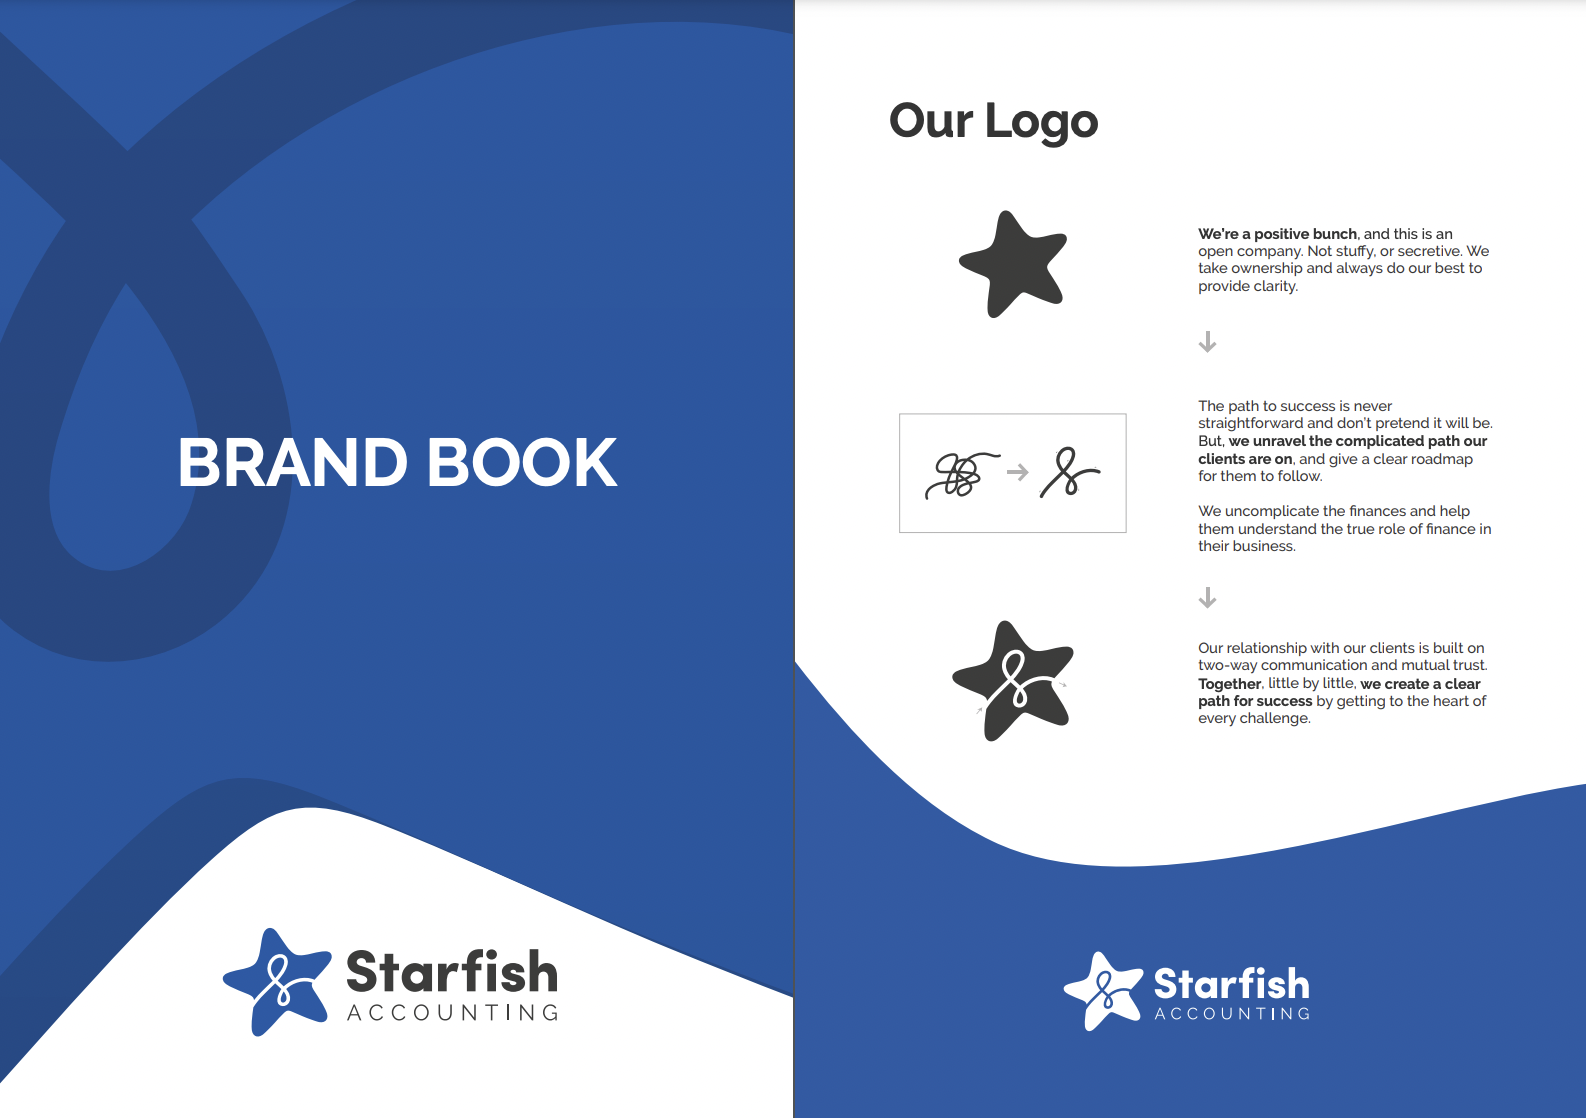 How to Create a Brand Book and Why Do You Need One?